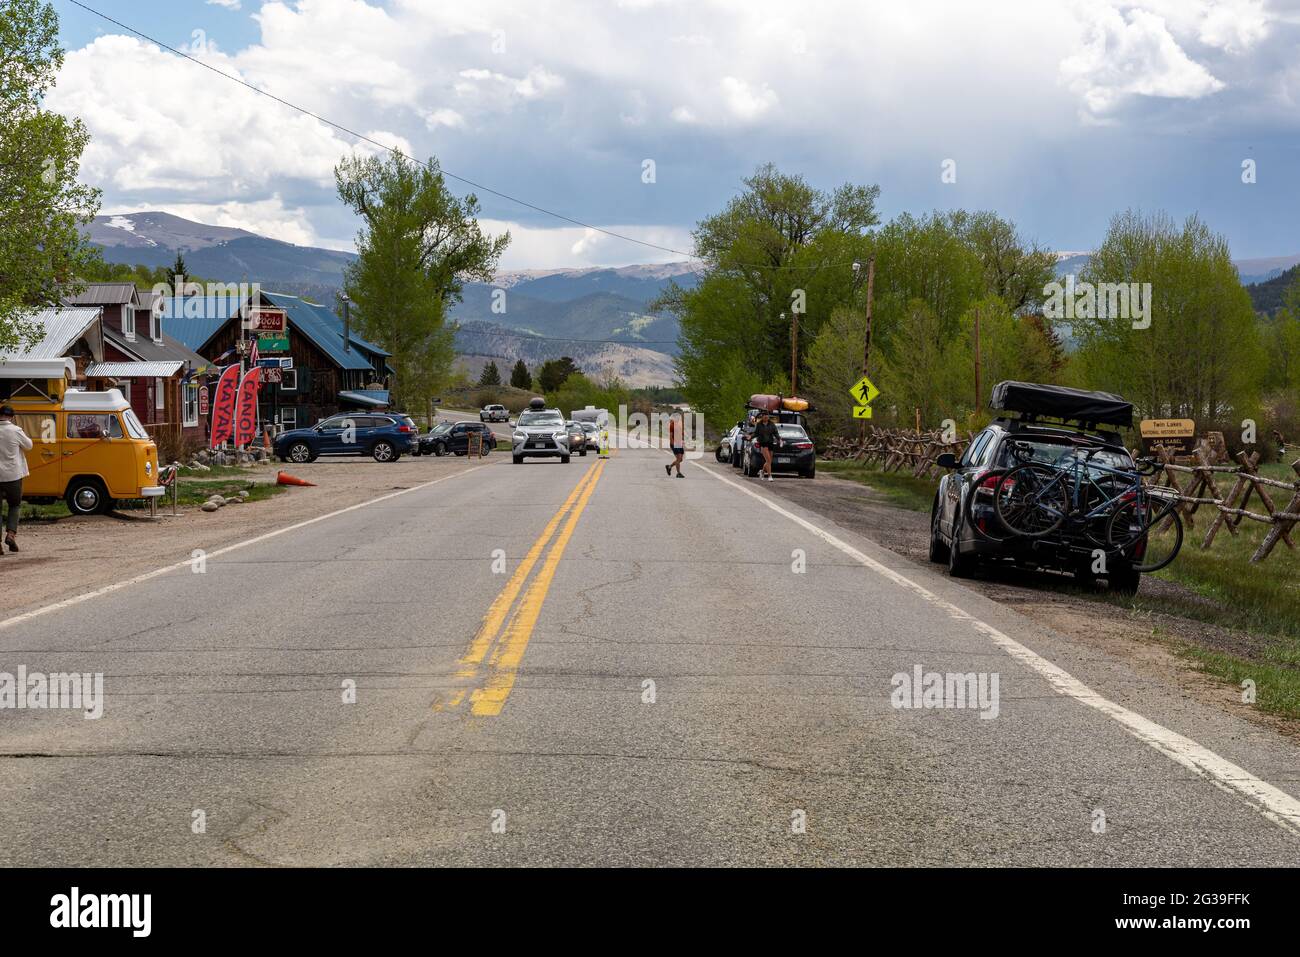 Twin Lakes, Colorado, on Highway 82, tourists crossing the road, cars parked alongside highway. The tourist town is at base of Independence Pass. Stock Photo